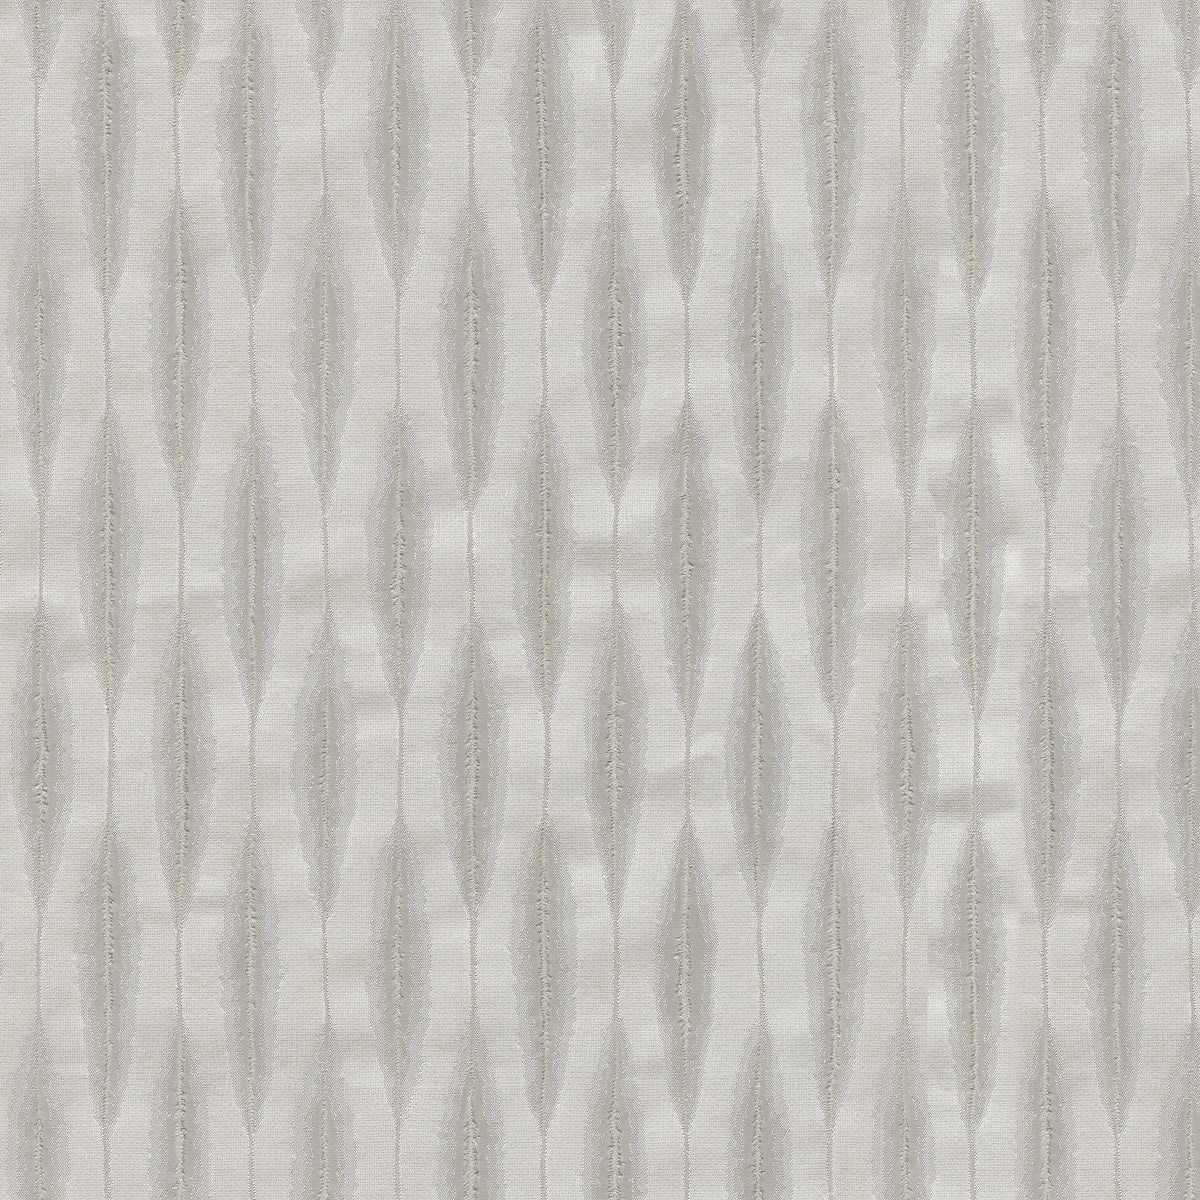 P/K Lifestyles Portia - Sterling 470750 Upholstery Fabric